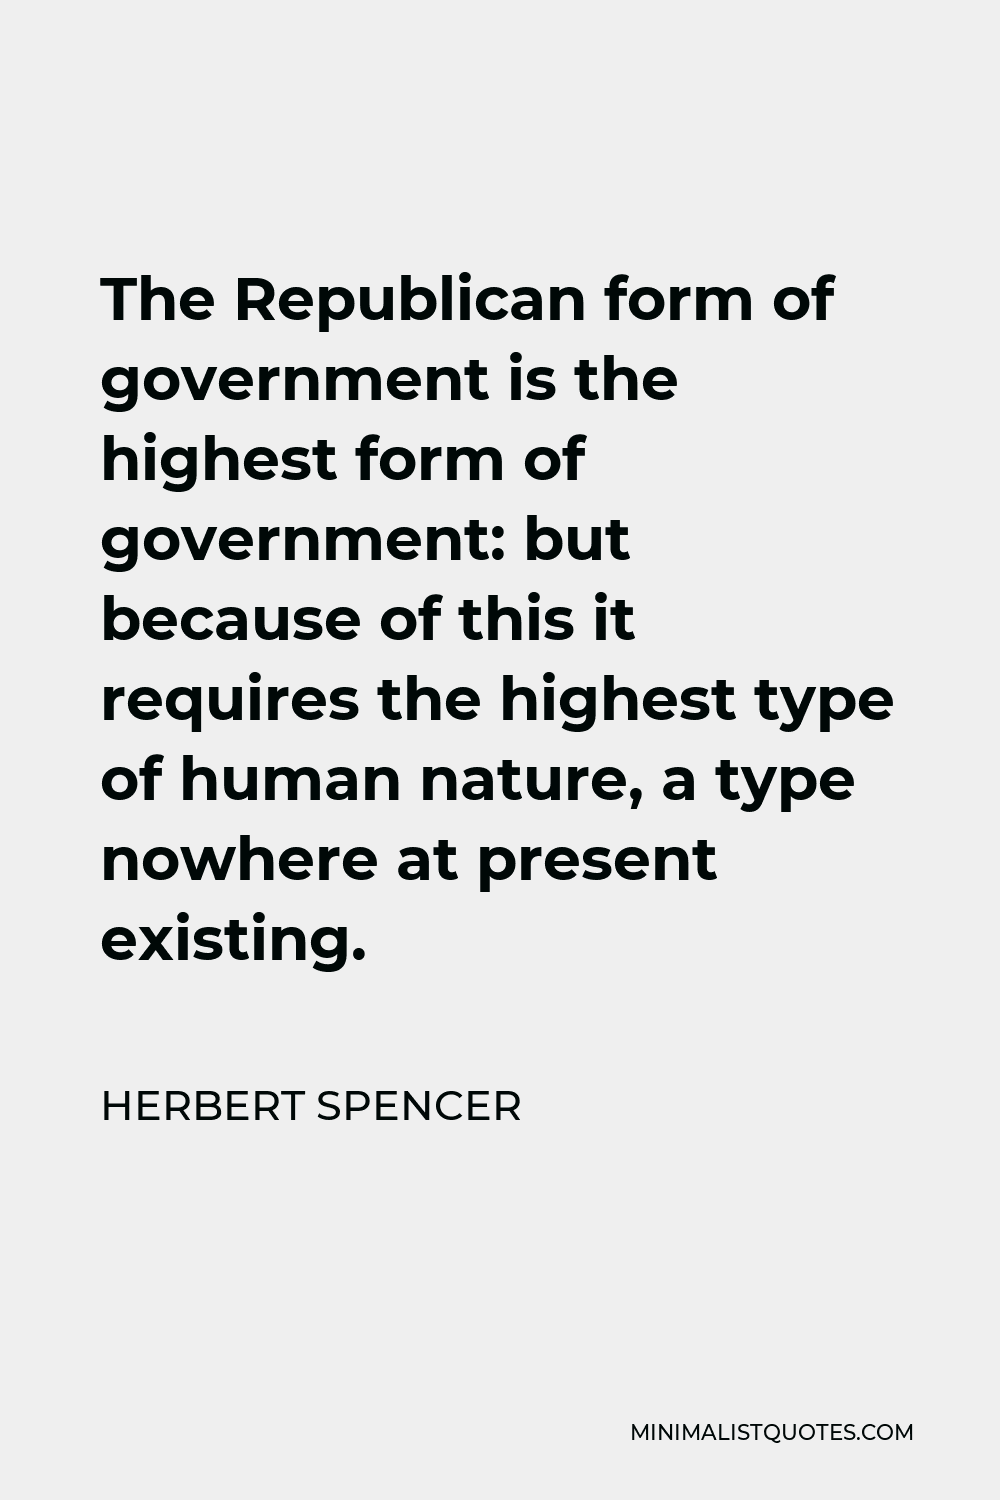 Herbert Spencer Quote - The Republican form of government is the highest form of government: but because of this it requires the highest type of human nature, a type nowhere at present existing.